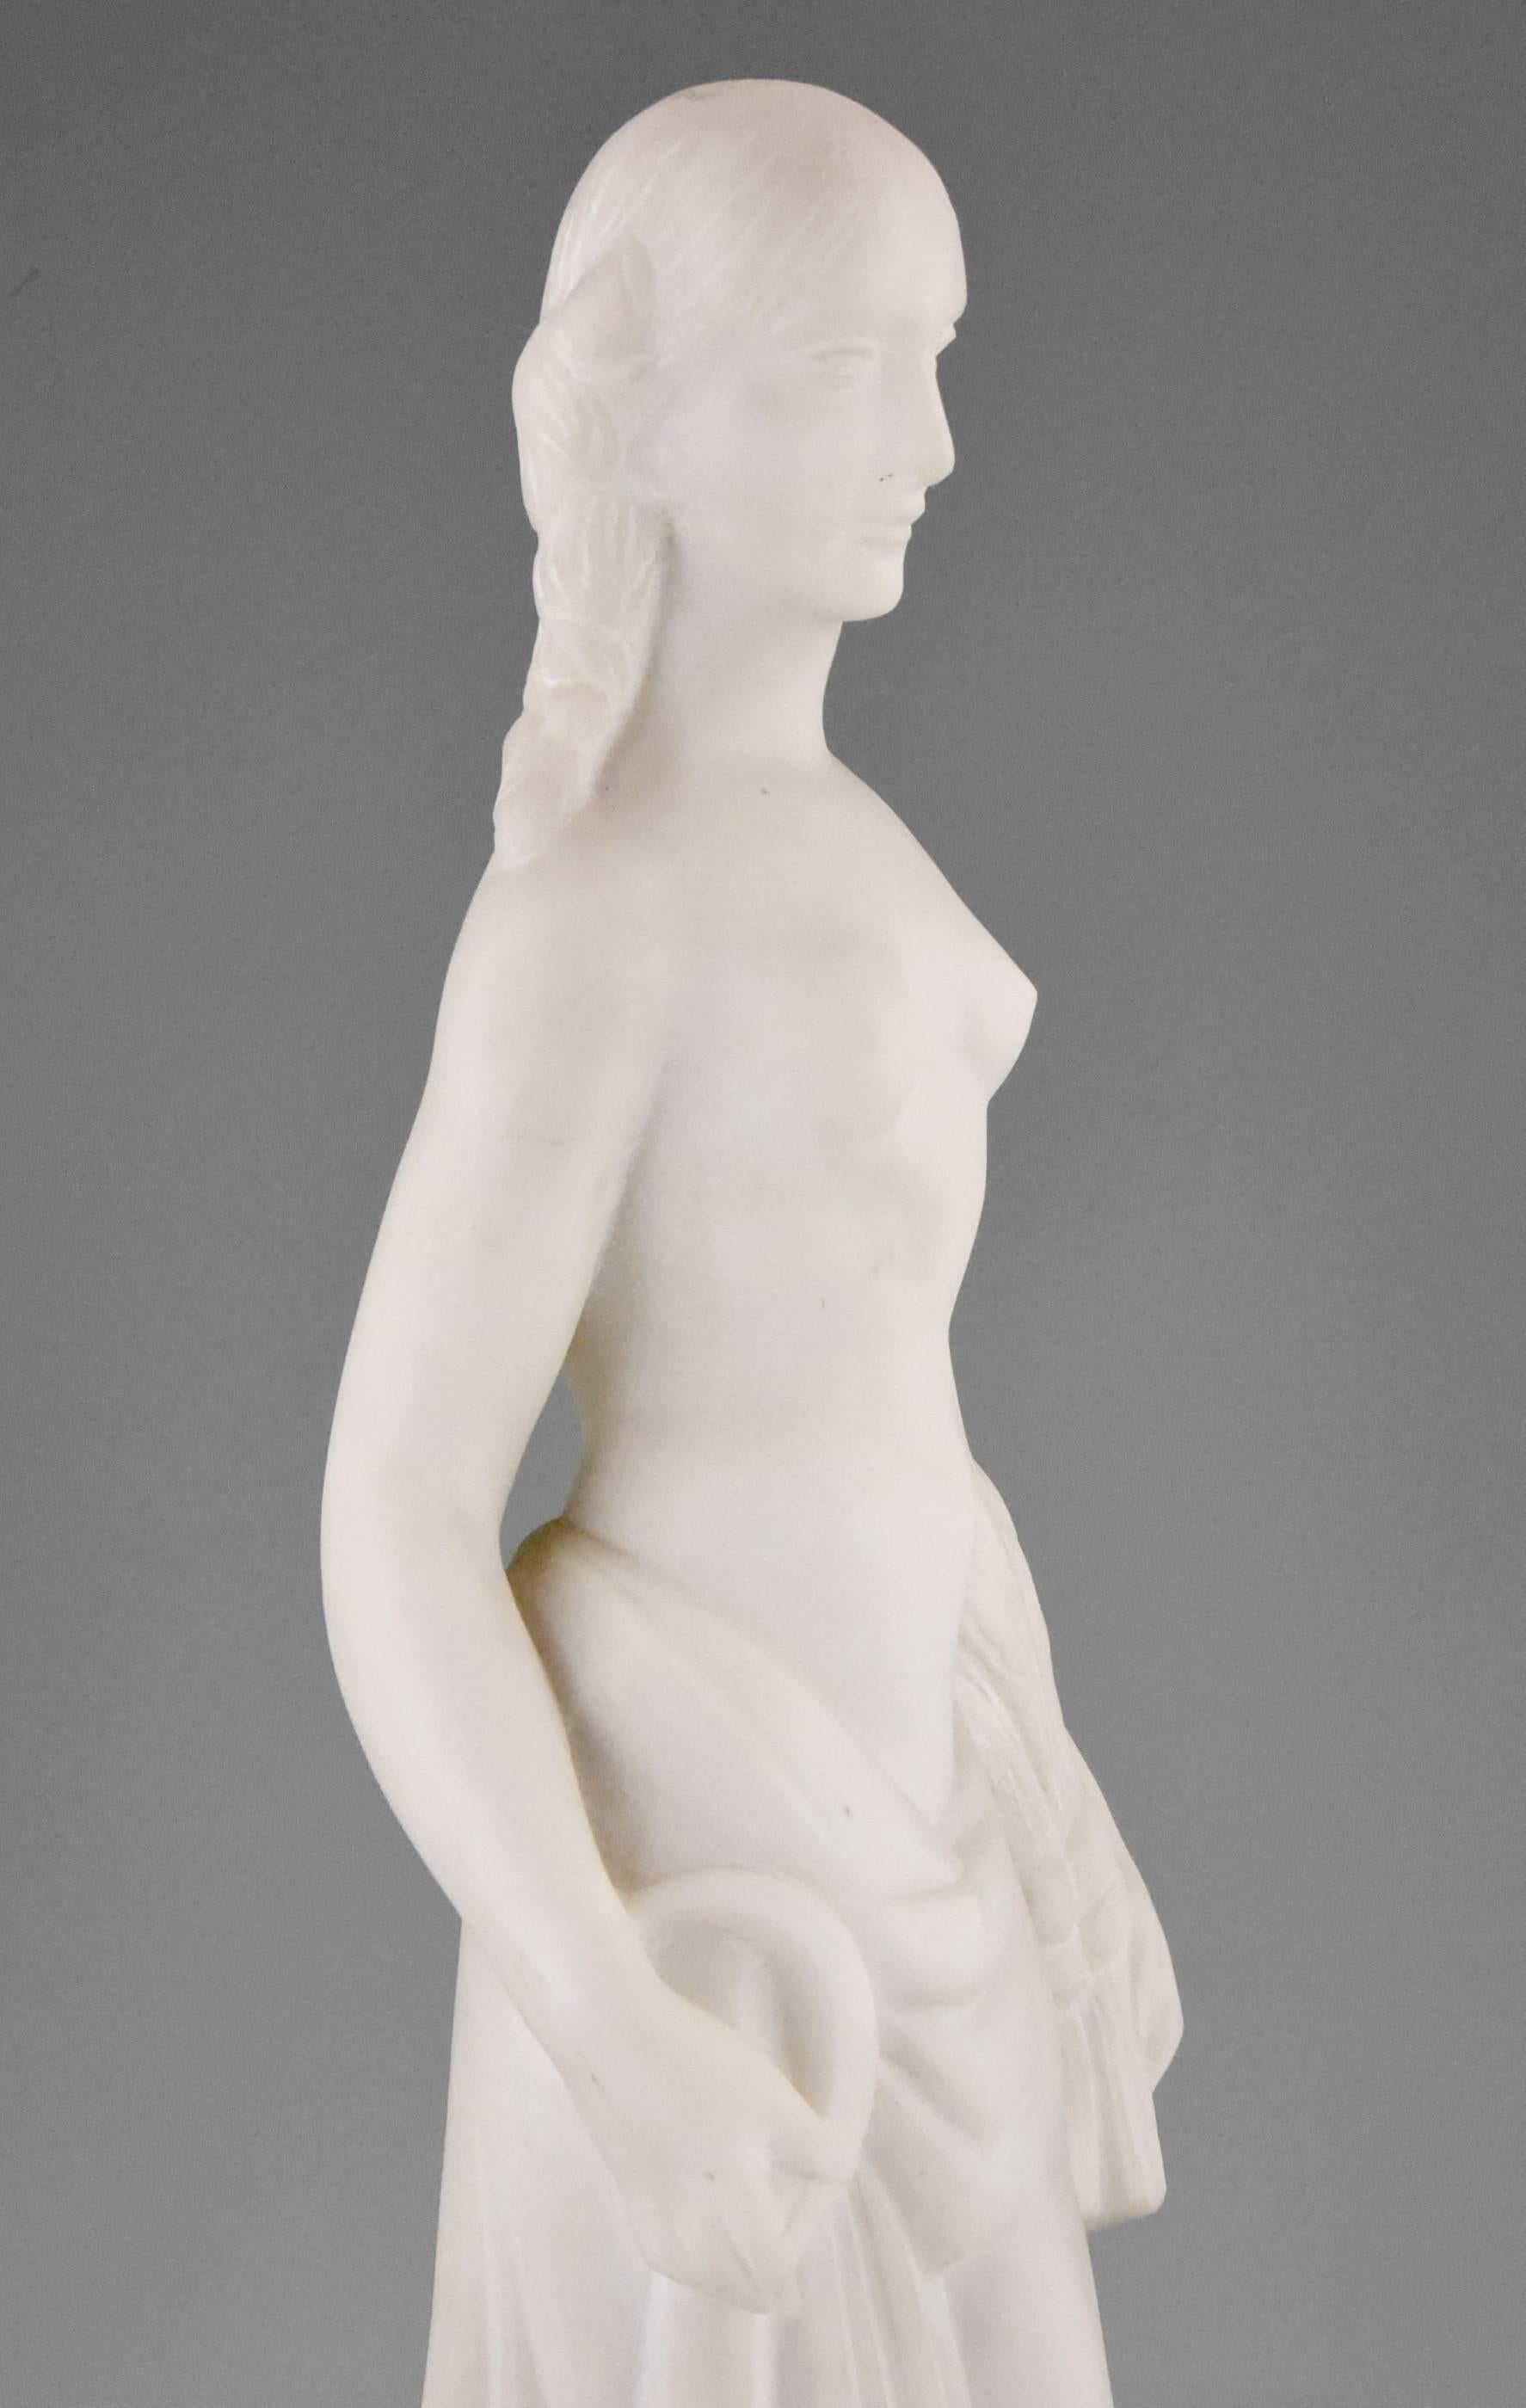 20th Century Art Deco White Marble Sculpture of a Nude by Jules Bernaerts, 1935